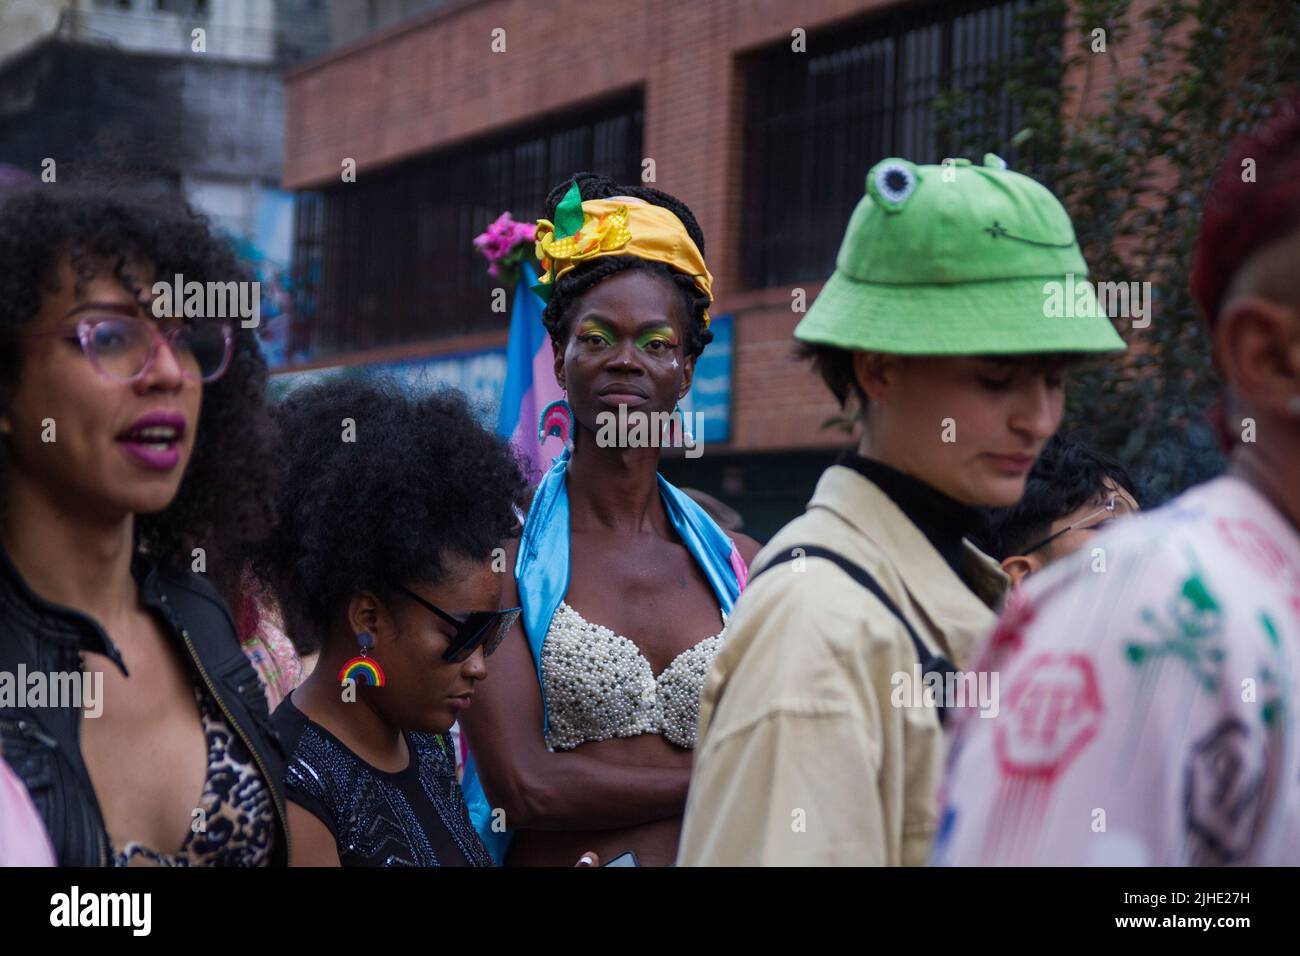 A demonstrator parades during the 2022 'Yo Marcho Trans' transgender community pride parade in Bogota, Colombia on July 15, 2022. Stock Photo